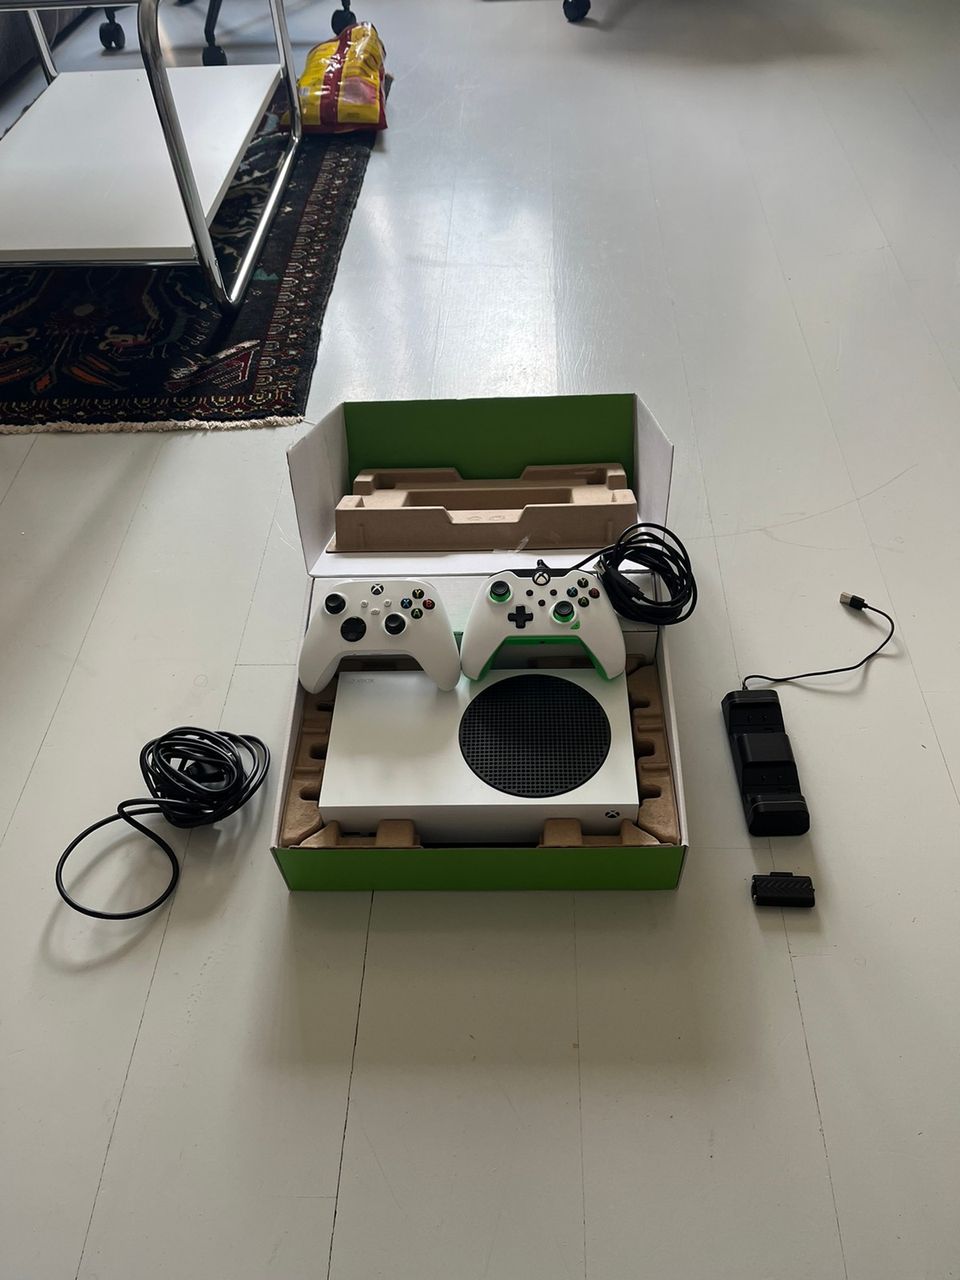 X-box series S, extra controller, 2 rechargeable batteries with charging station